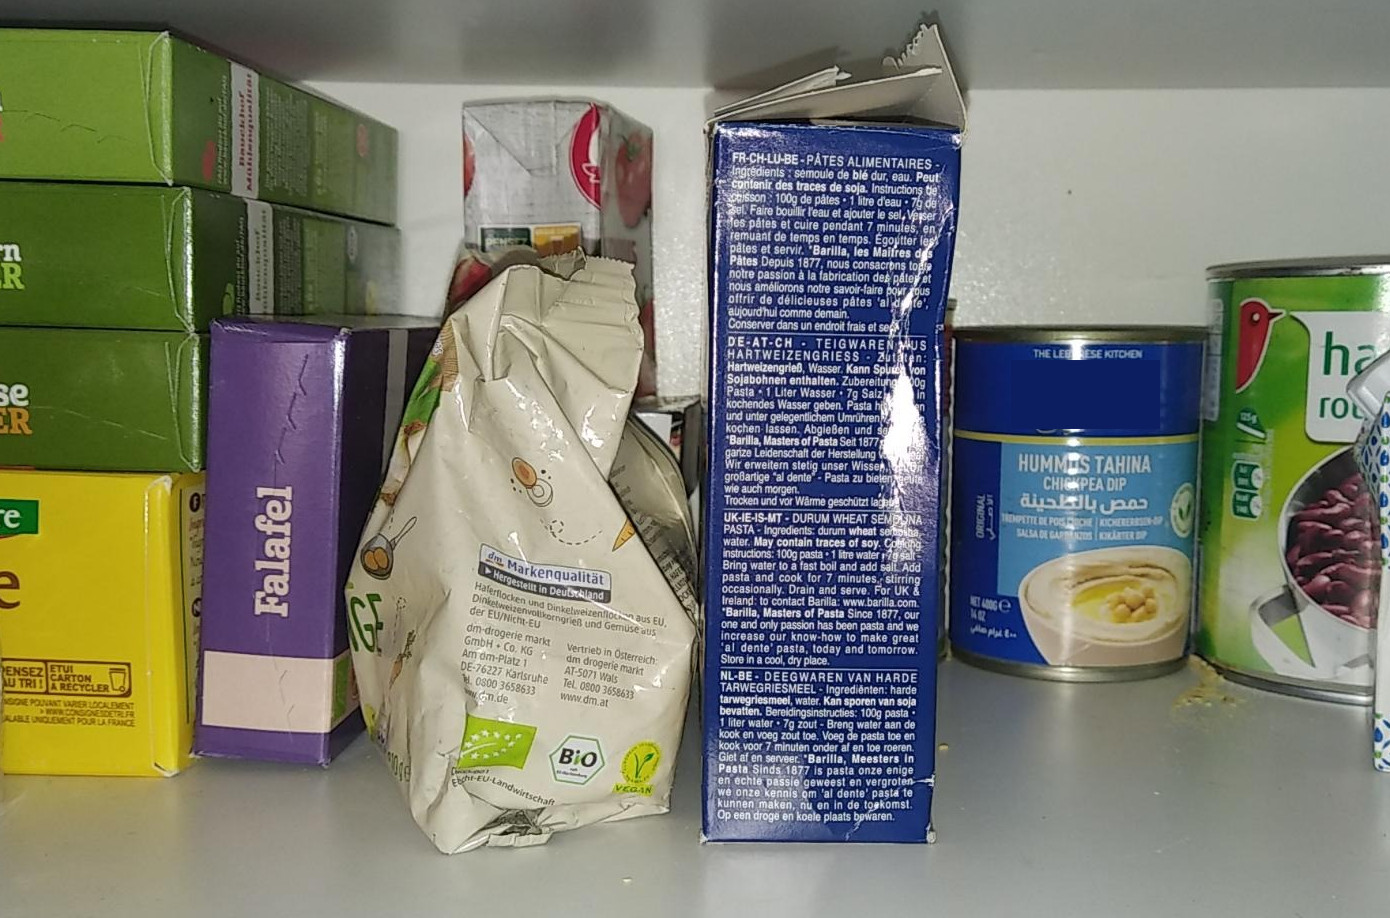 To illustrate low cohesion. A picture of packs of food. A box of falafel preparation, some other boxes, and then a can of hummus.